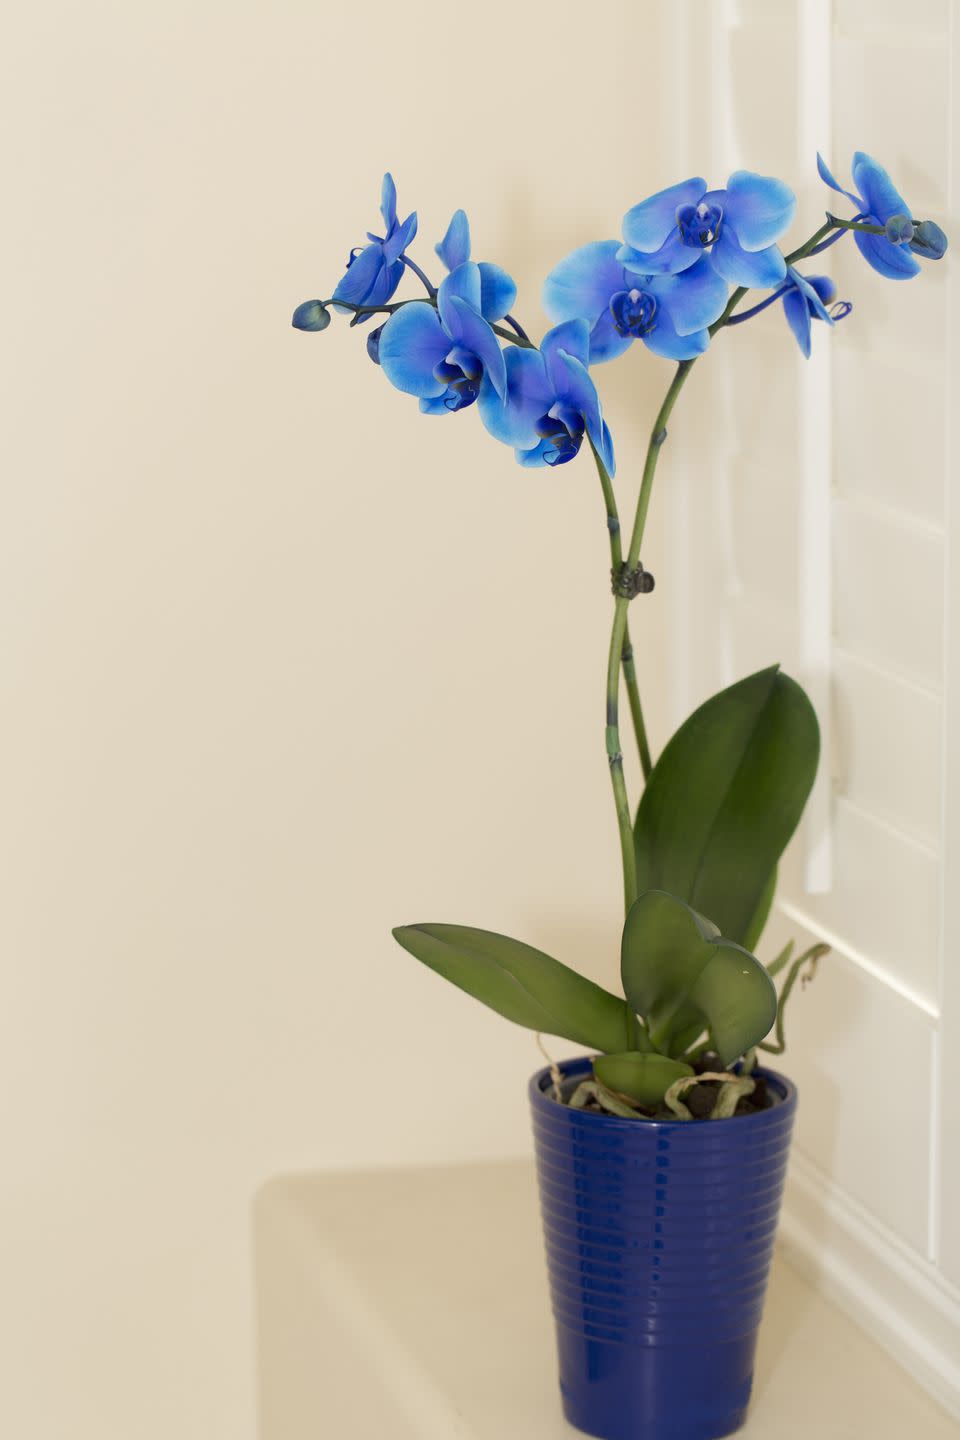 still life display of blue and purple orchids in blue vase set upon window ledge in bedroom